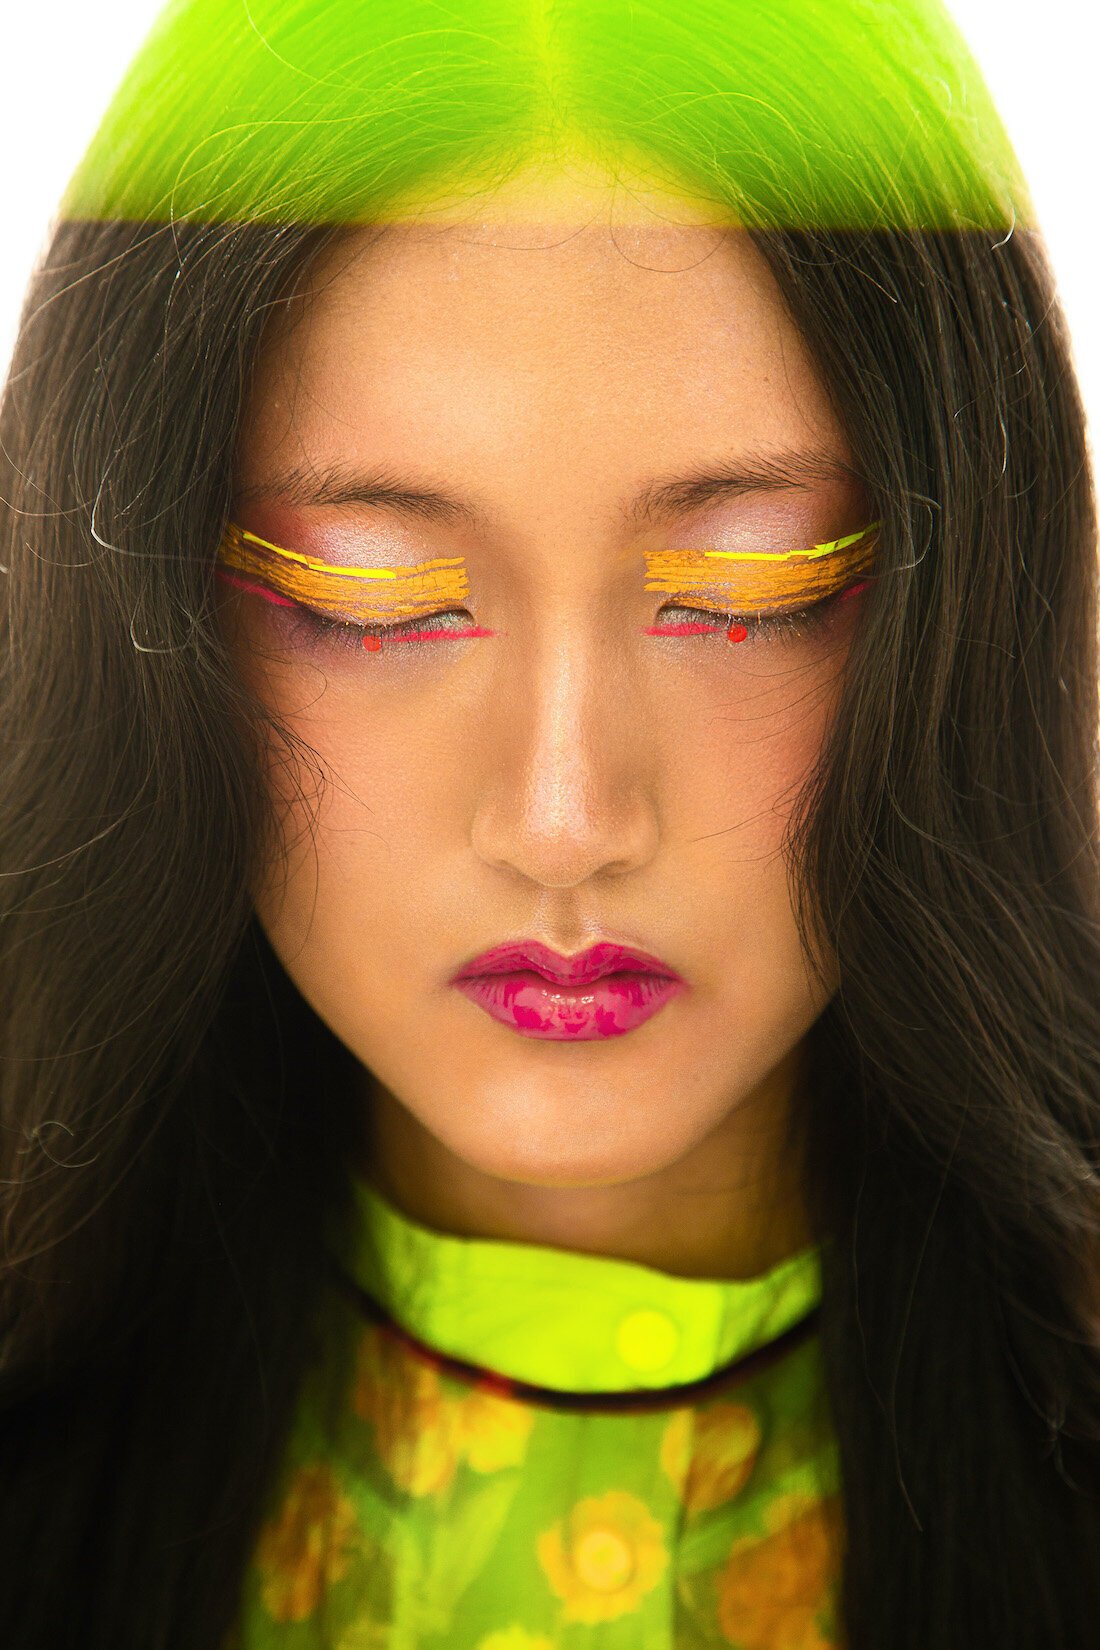 asian-woman-colorful-makeup-eyes-closed